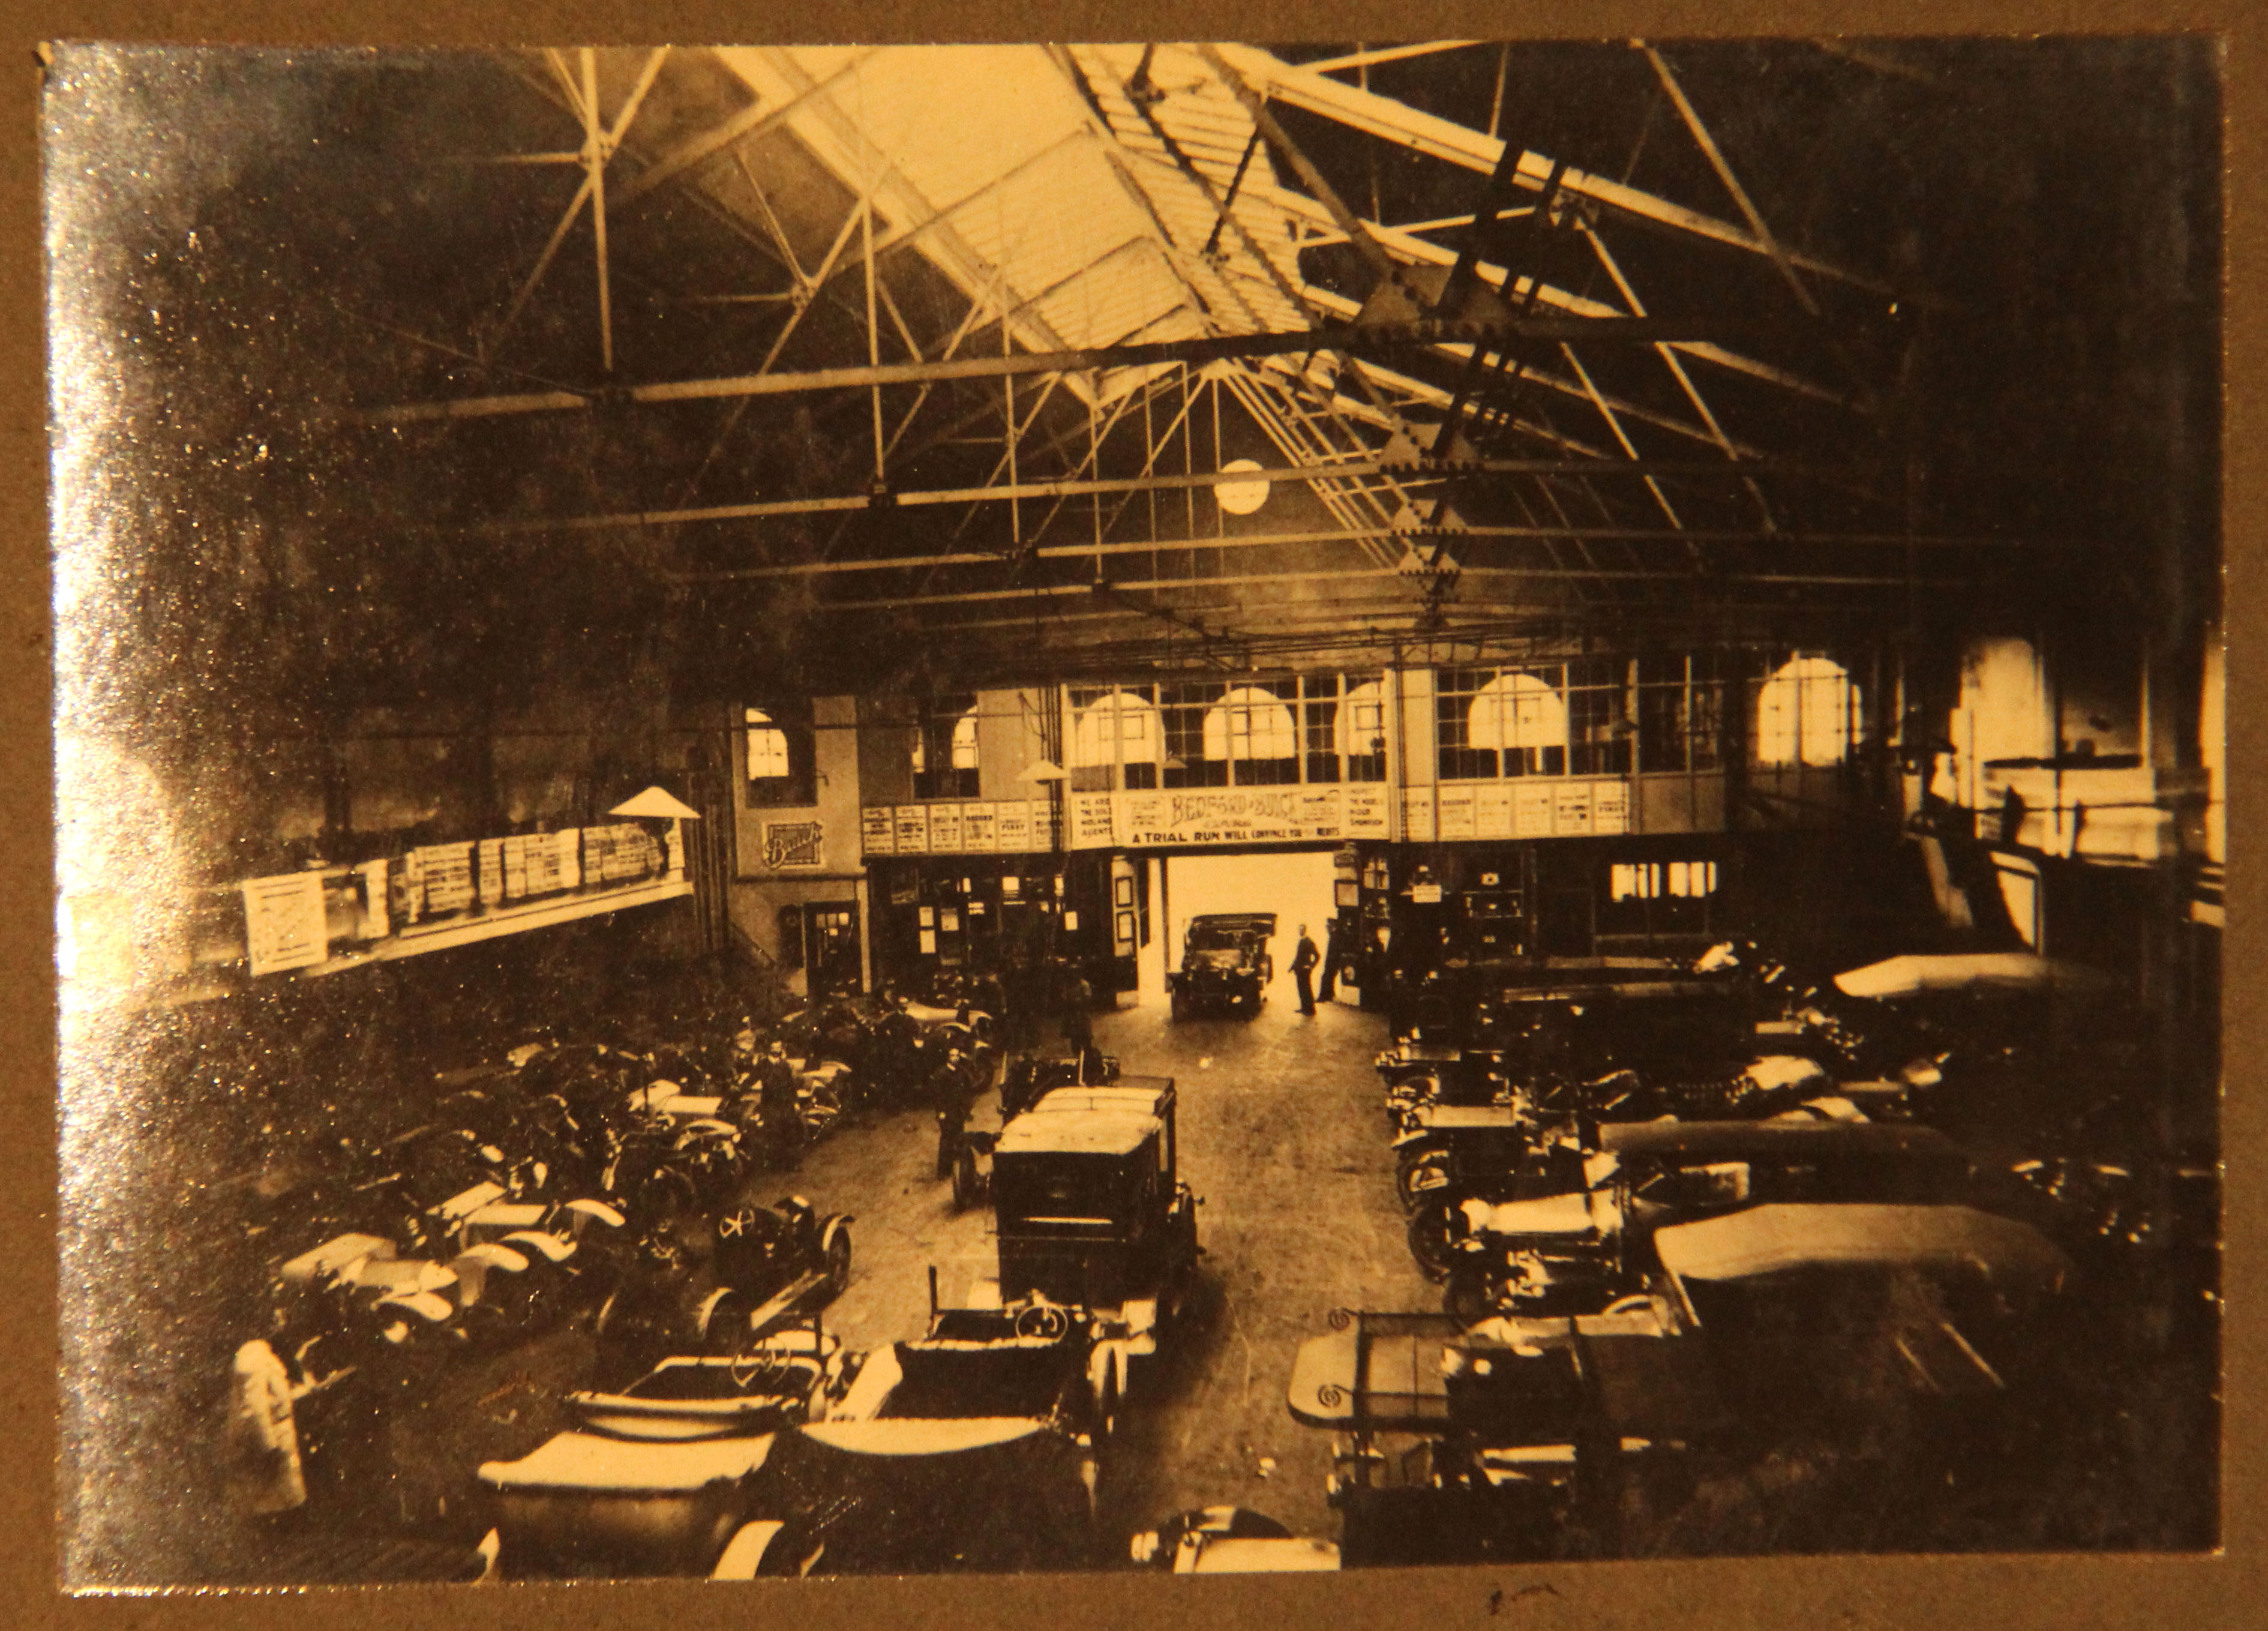 The Birmingham Garages Ltd. Authorised Dealers for Wolseley Cars. - Image 12 of 12